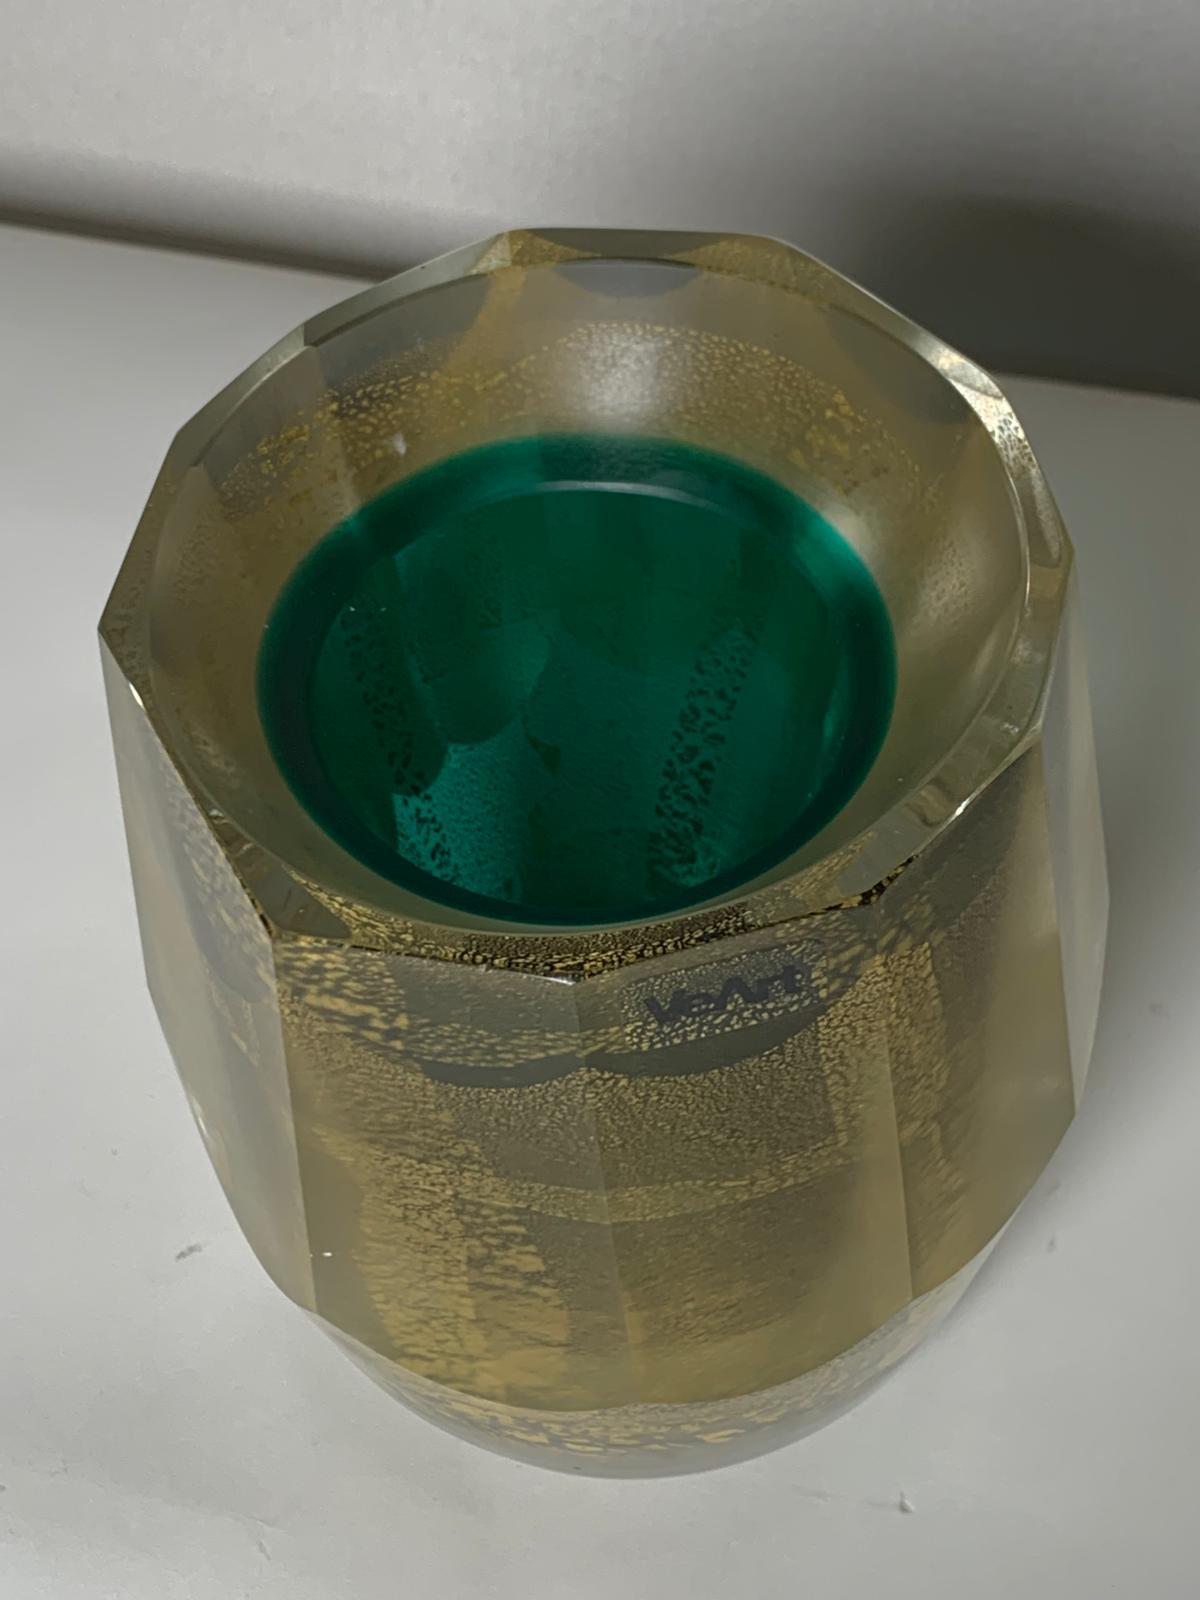 From the I Molati series in thick blown and ground glass with aventurine designed by Afra and Tobia Scarpa.
Limited edition of 99 copies. Signature and numbering engraved under the base. VeArt production. Numbered 15 of 99.

Biography
Protagonists